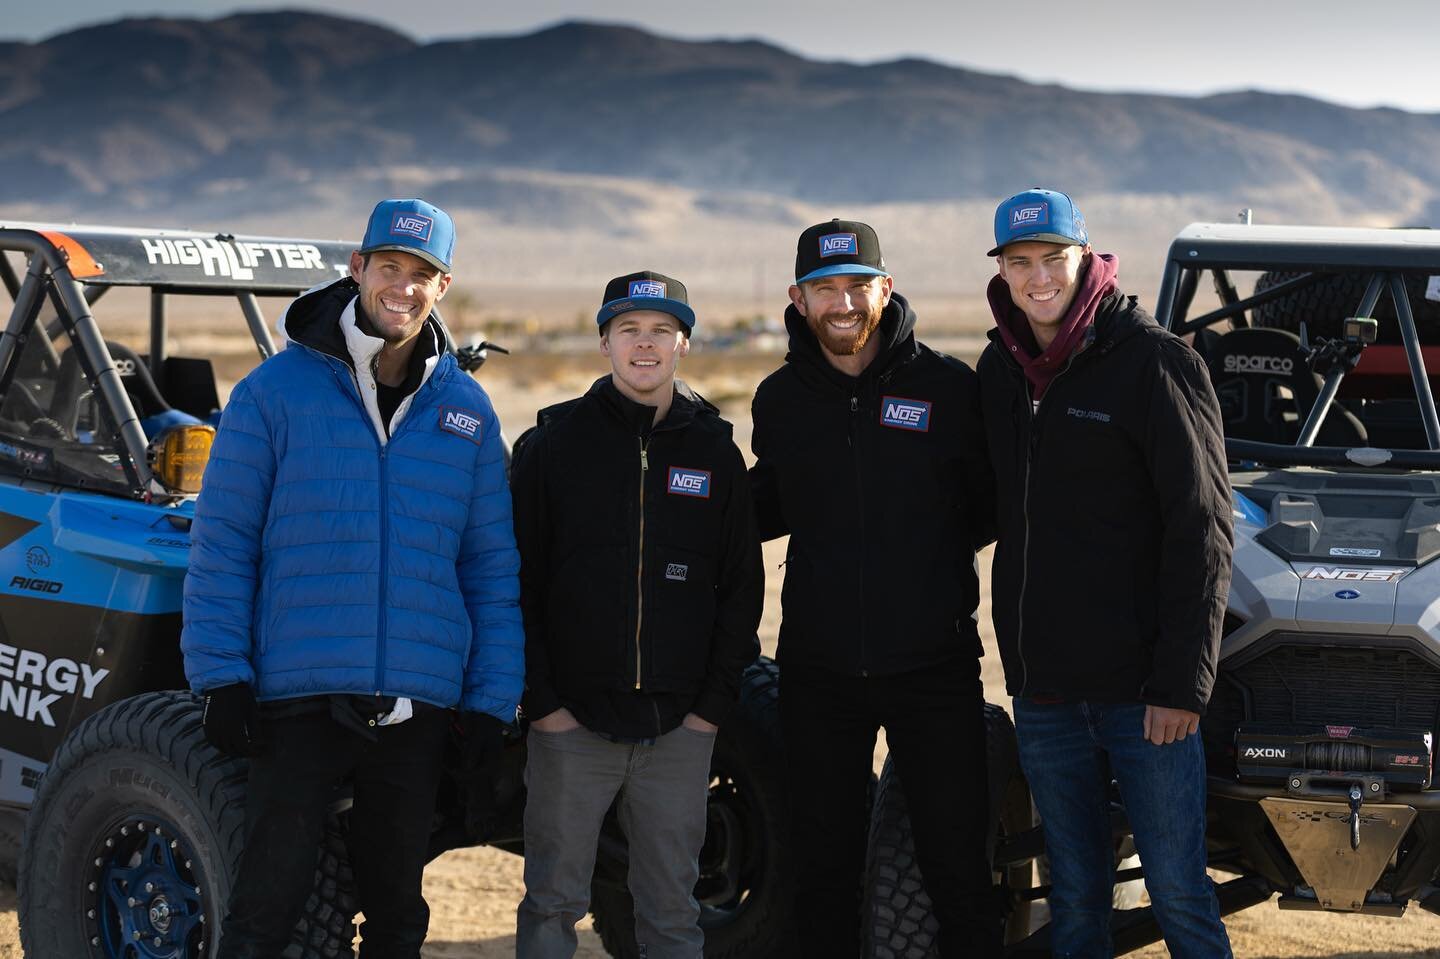 We took our @nosenergydrink teammates @chrisforsberg64 and @haudenschild_17 rock crawling out at King Of Hammers! Check out the Video at the Link in our Bio!! &mdash;&mdash;&mdash;&mdash;&mdash;&mdash;&mdash;&mdash;&mdash;&mdash;&mdash;&mdash;&mdash;